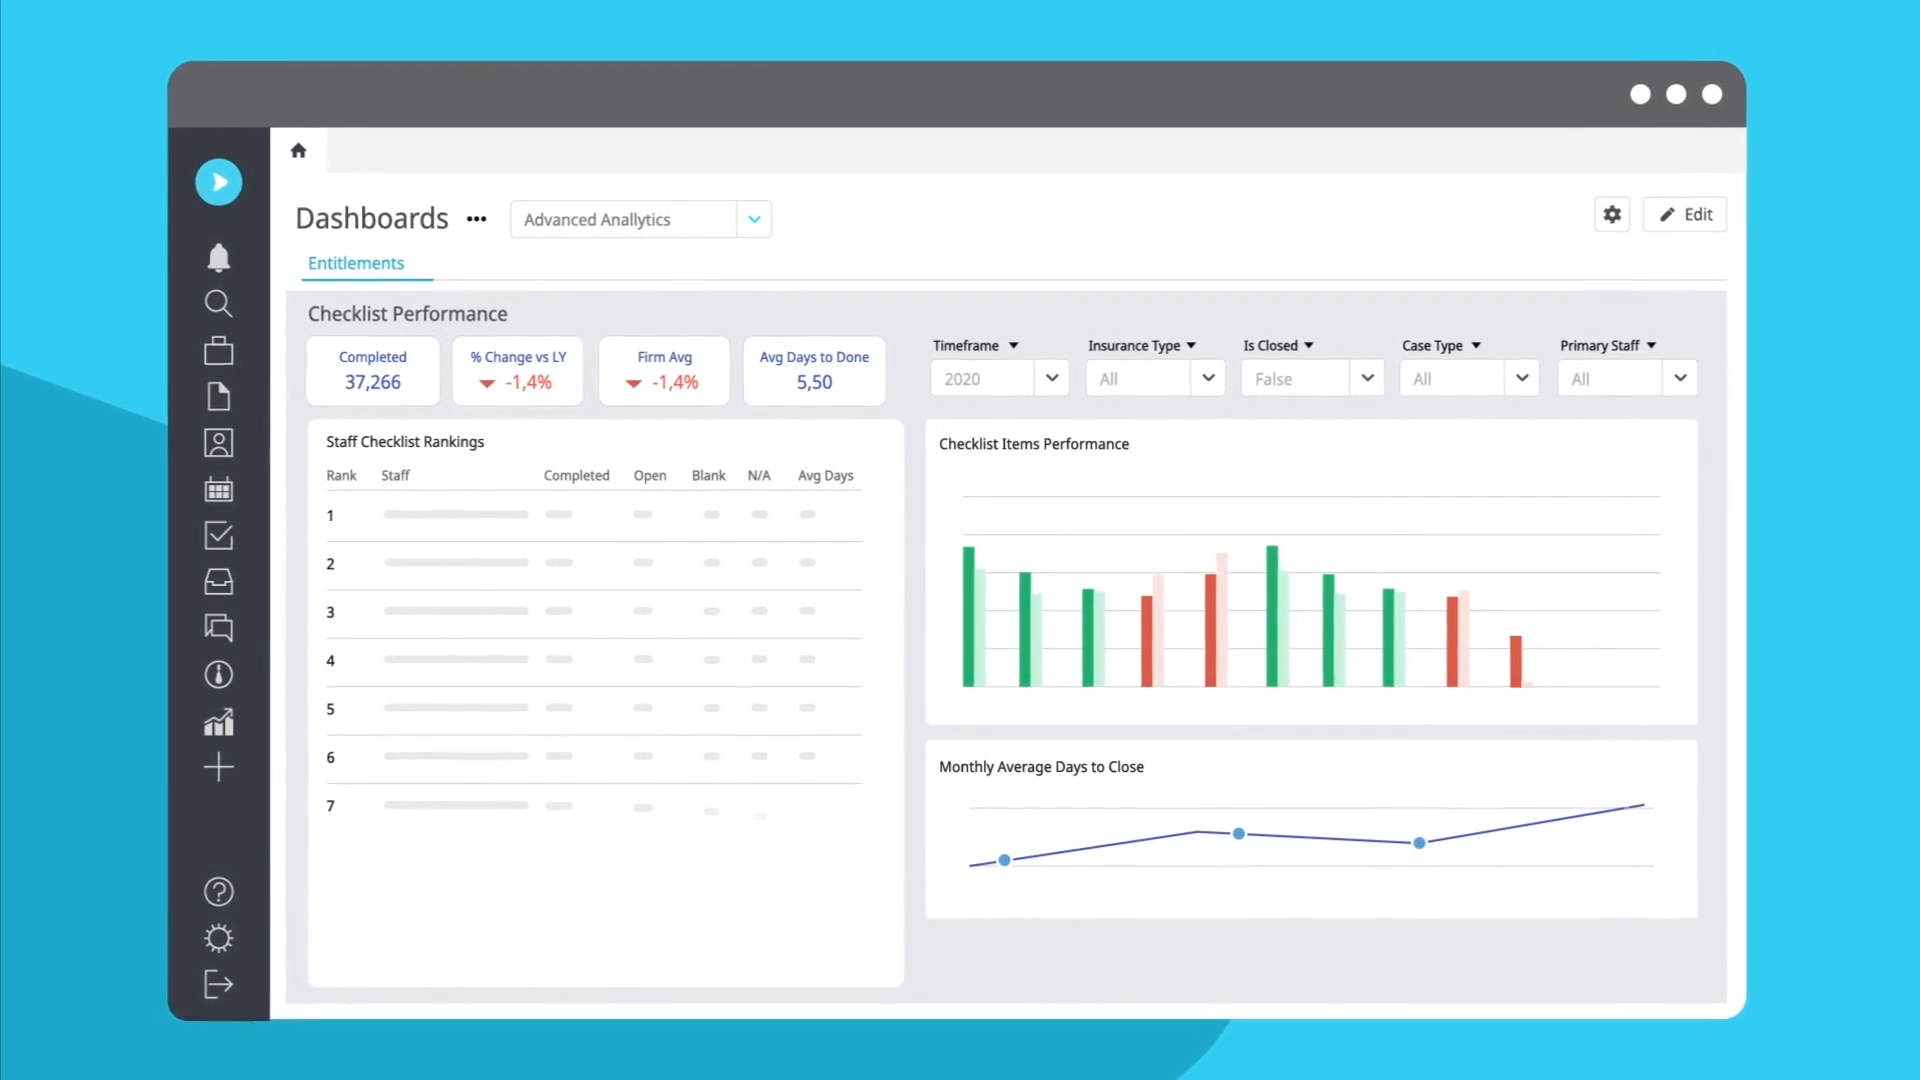 Powered by a lake of firm historical data, Advanced Analytics in Neos will visualize firm, group, and individual performance to help boost productivity, efficiency, and profitability.